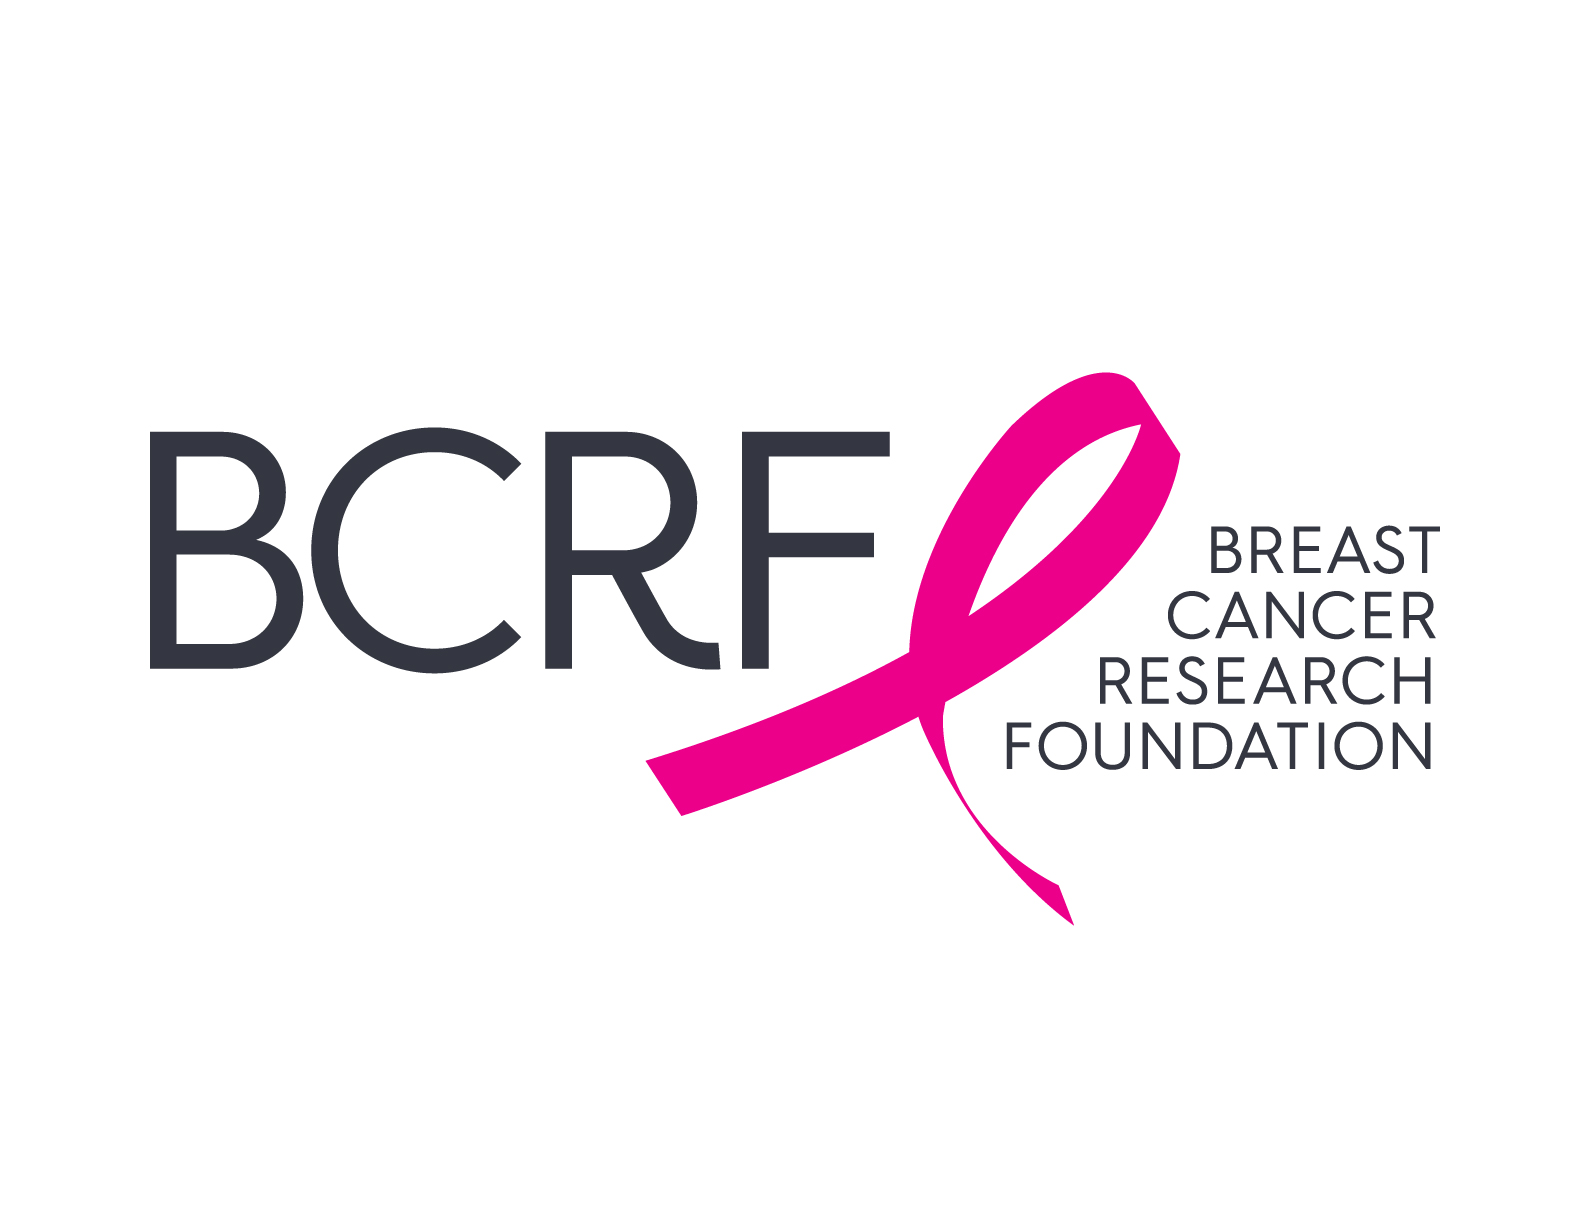 BREAST CANCER RESEARCH FOUNDATION INC